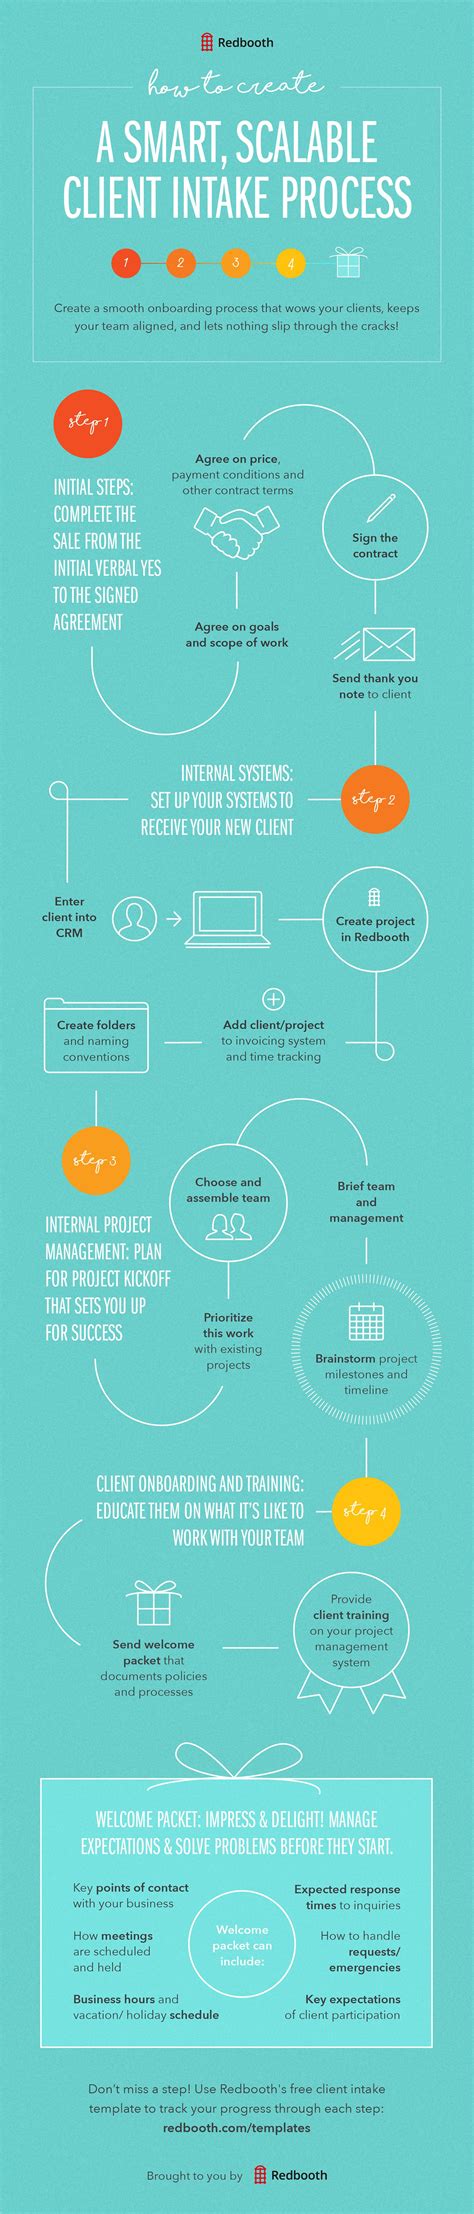 A Smart, Scalable Client Intake Process (Infographic) | Process infographic, Infographic, Onboarding